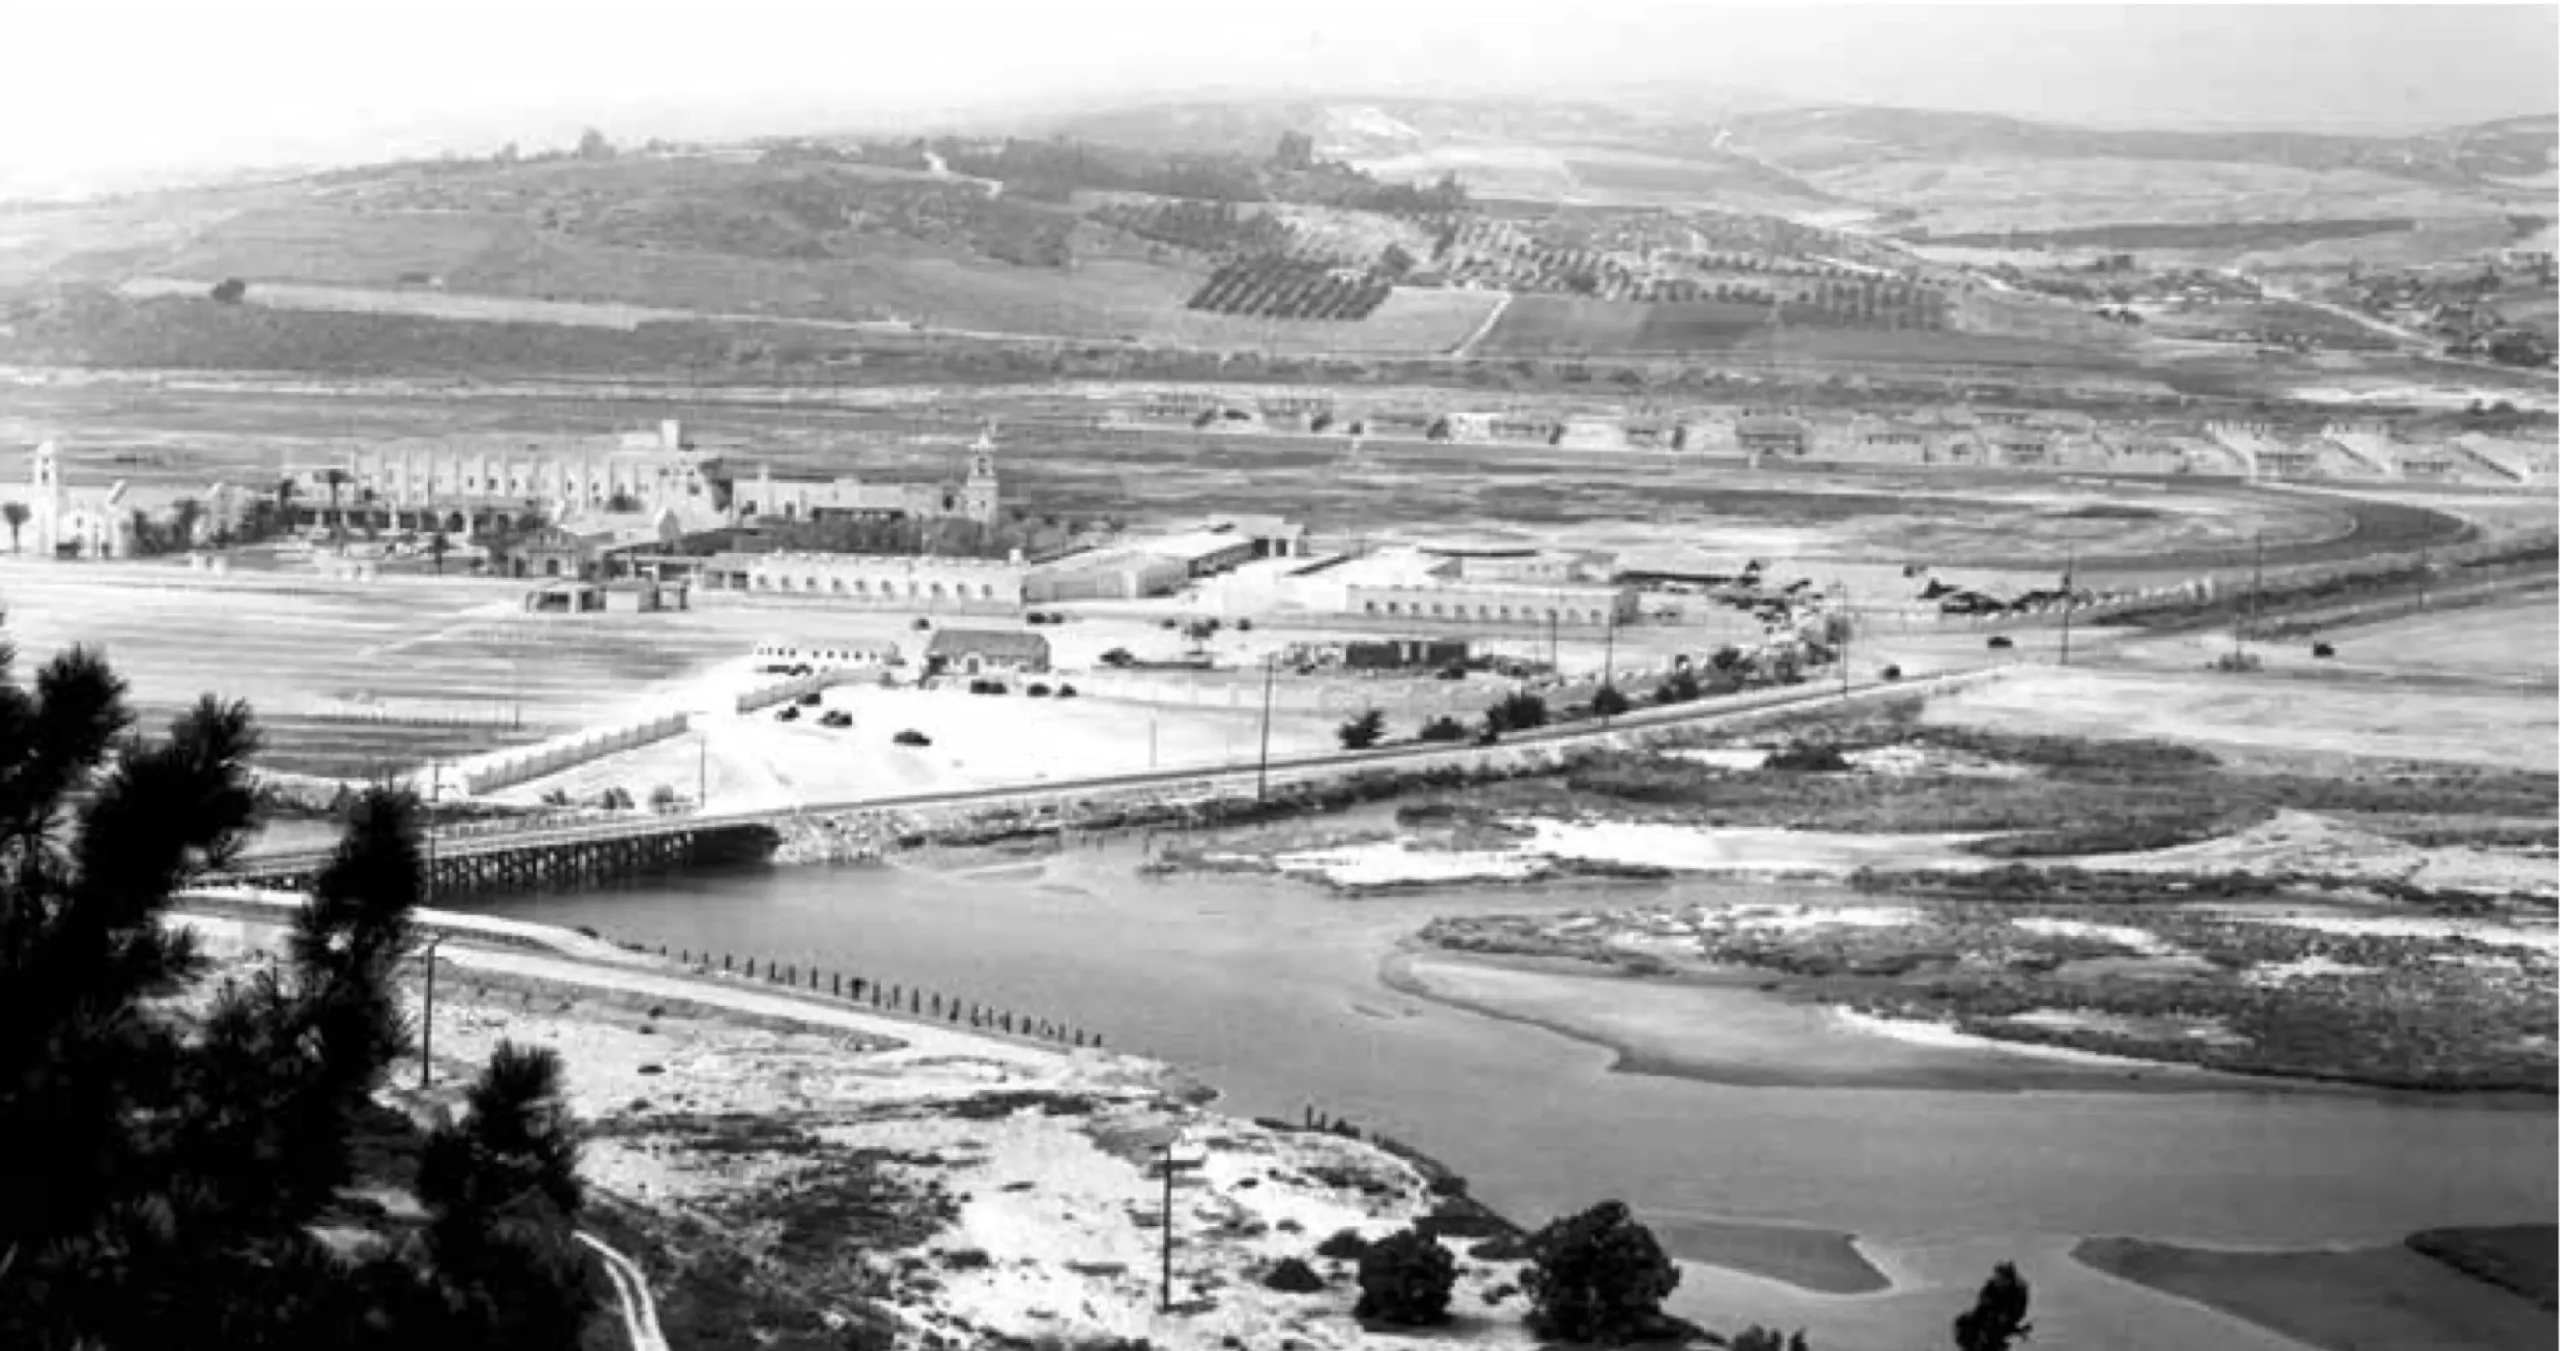 An old image of the Del Mar fairgrounds.